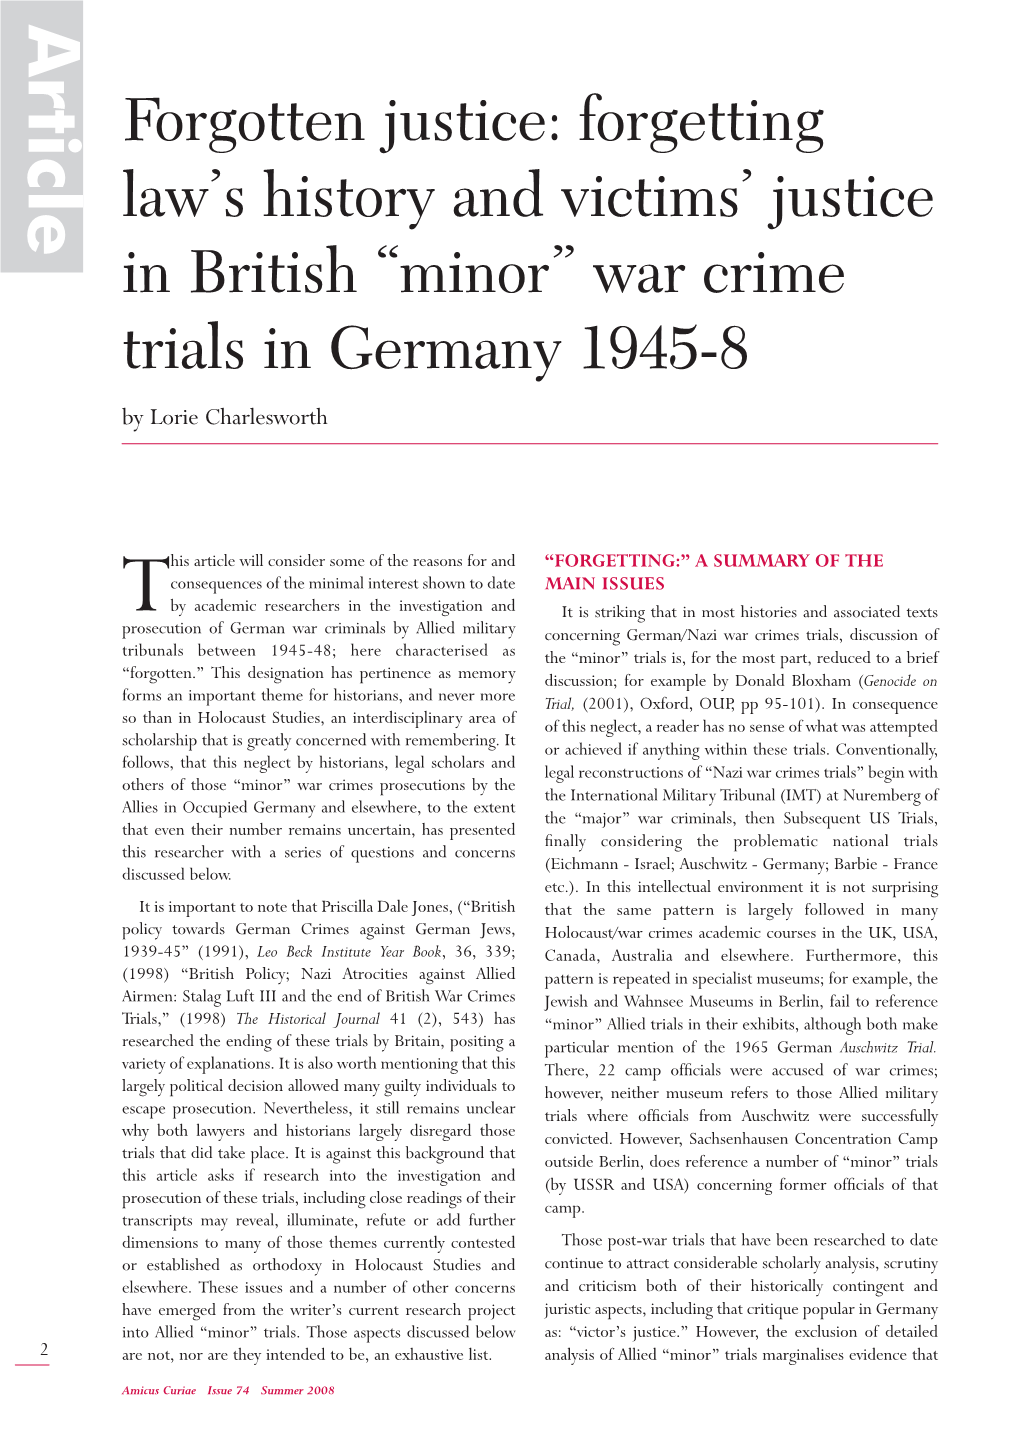 War Crime Trials in Germany 1945-8 by Lorie Charlesworth